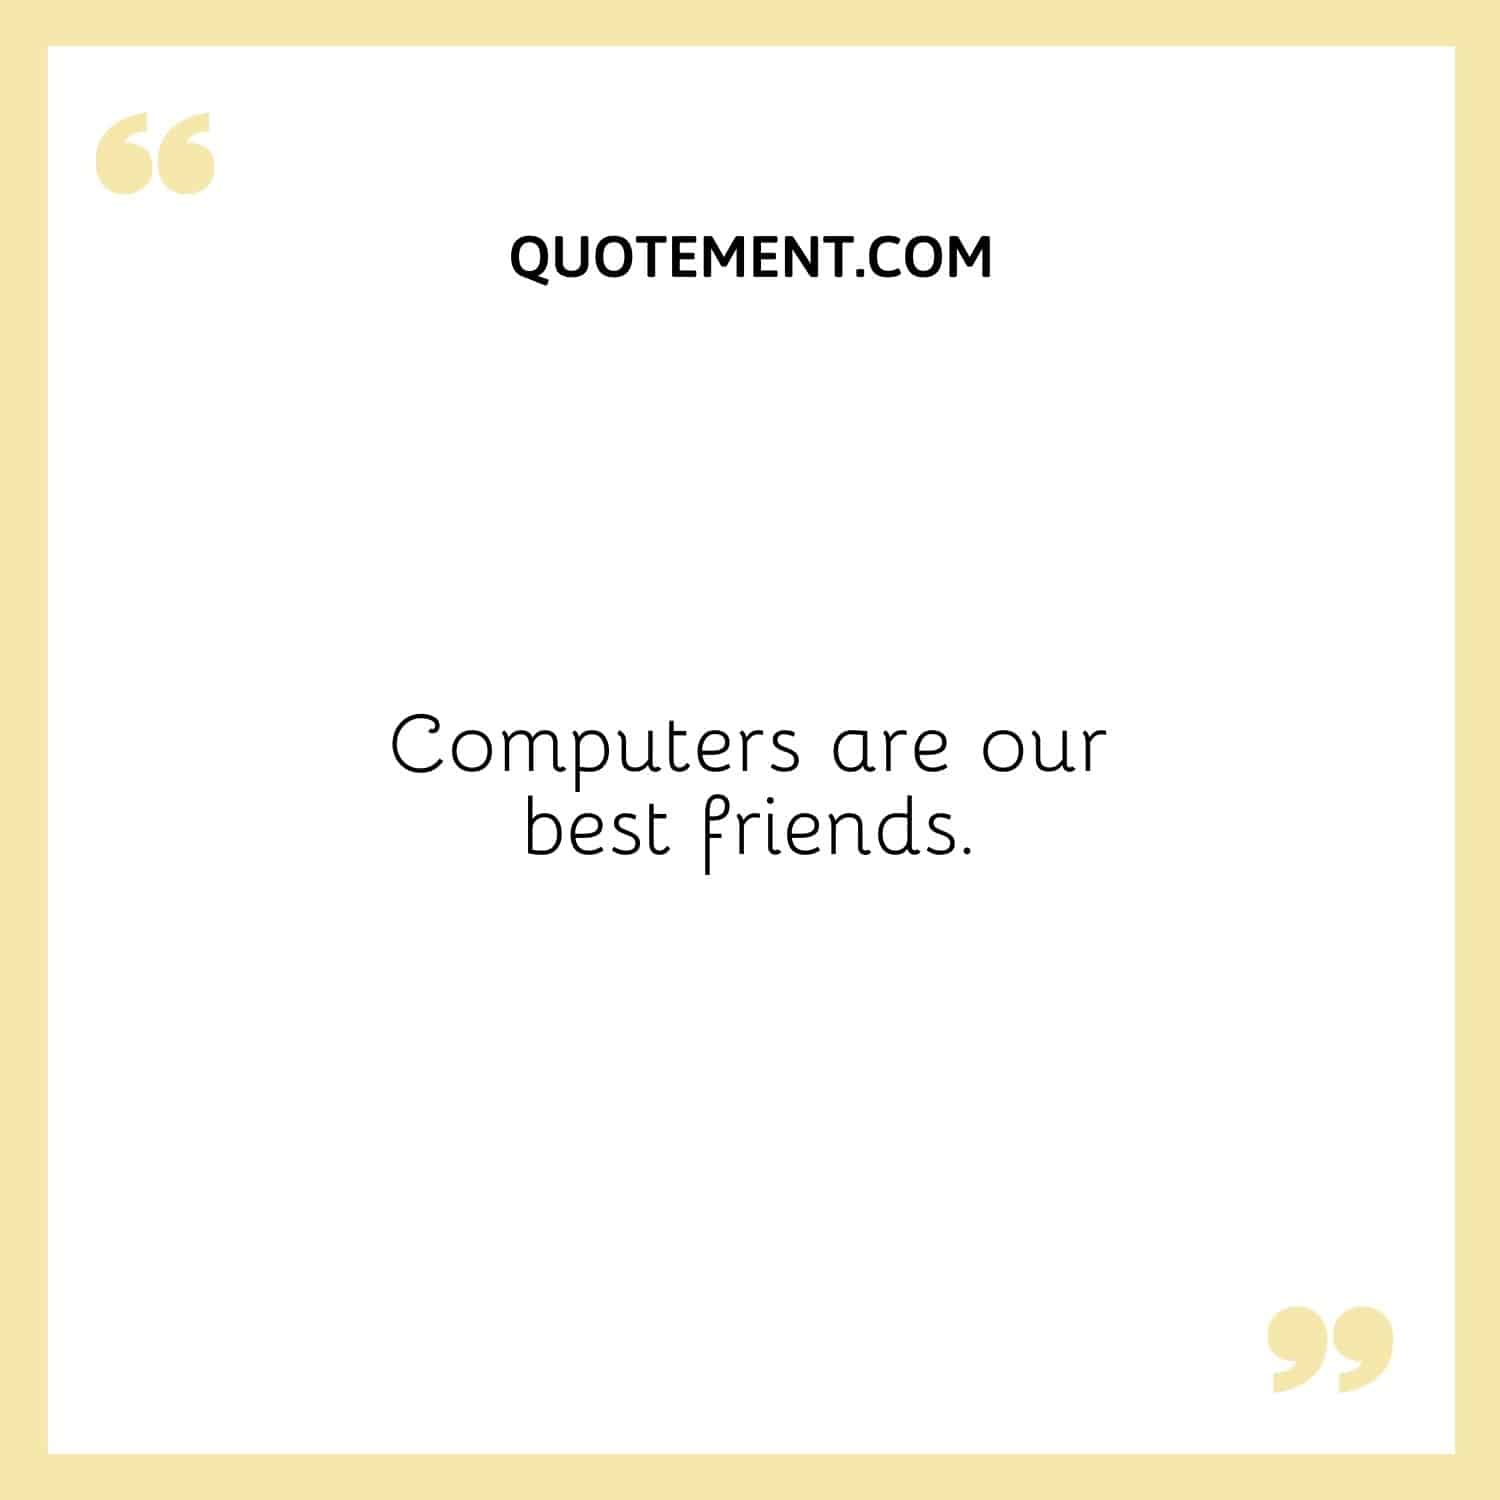 Computers are our best friends.